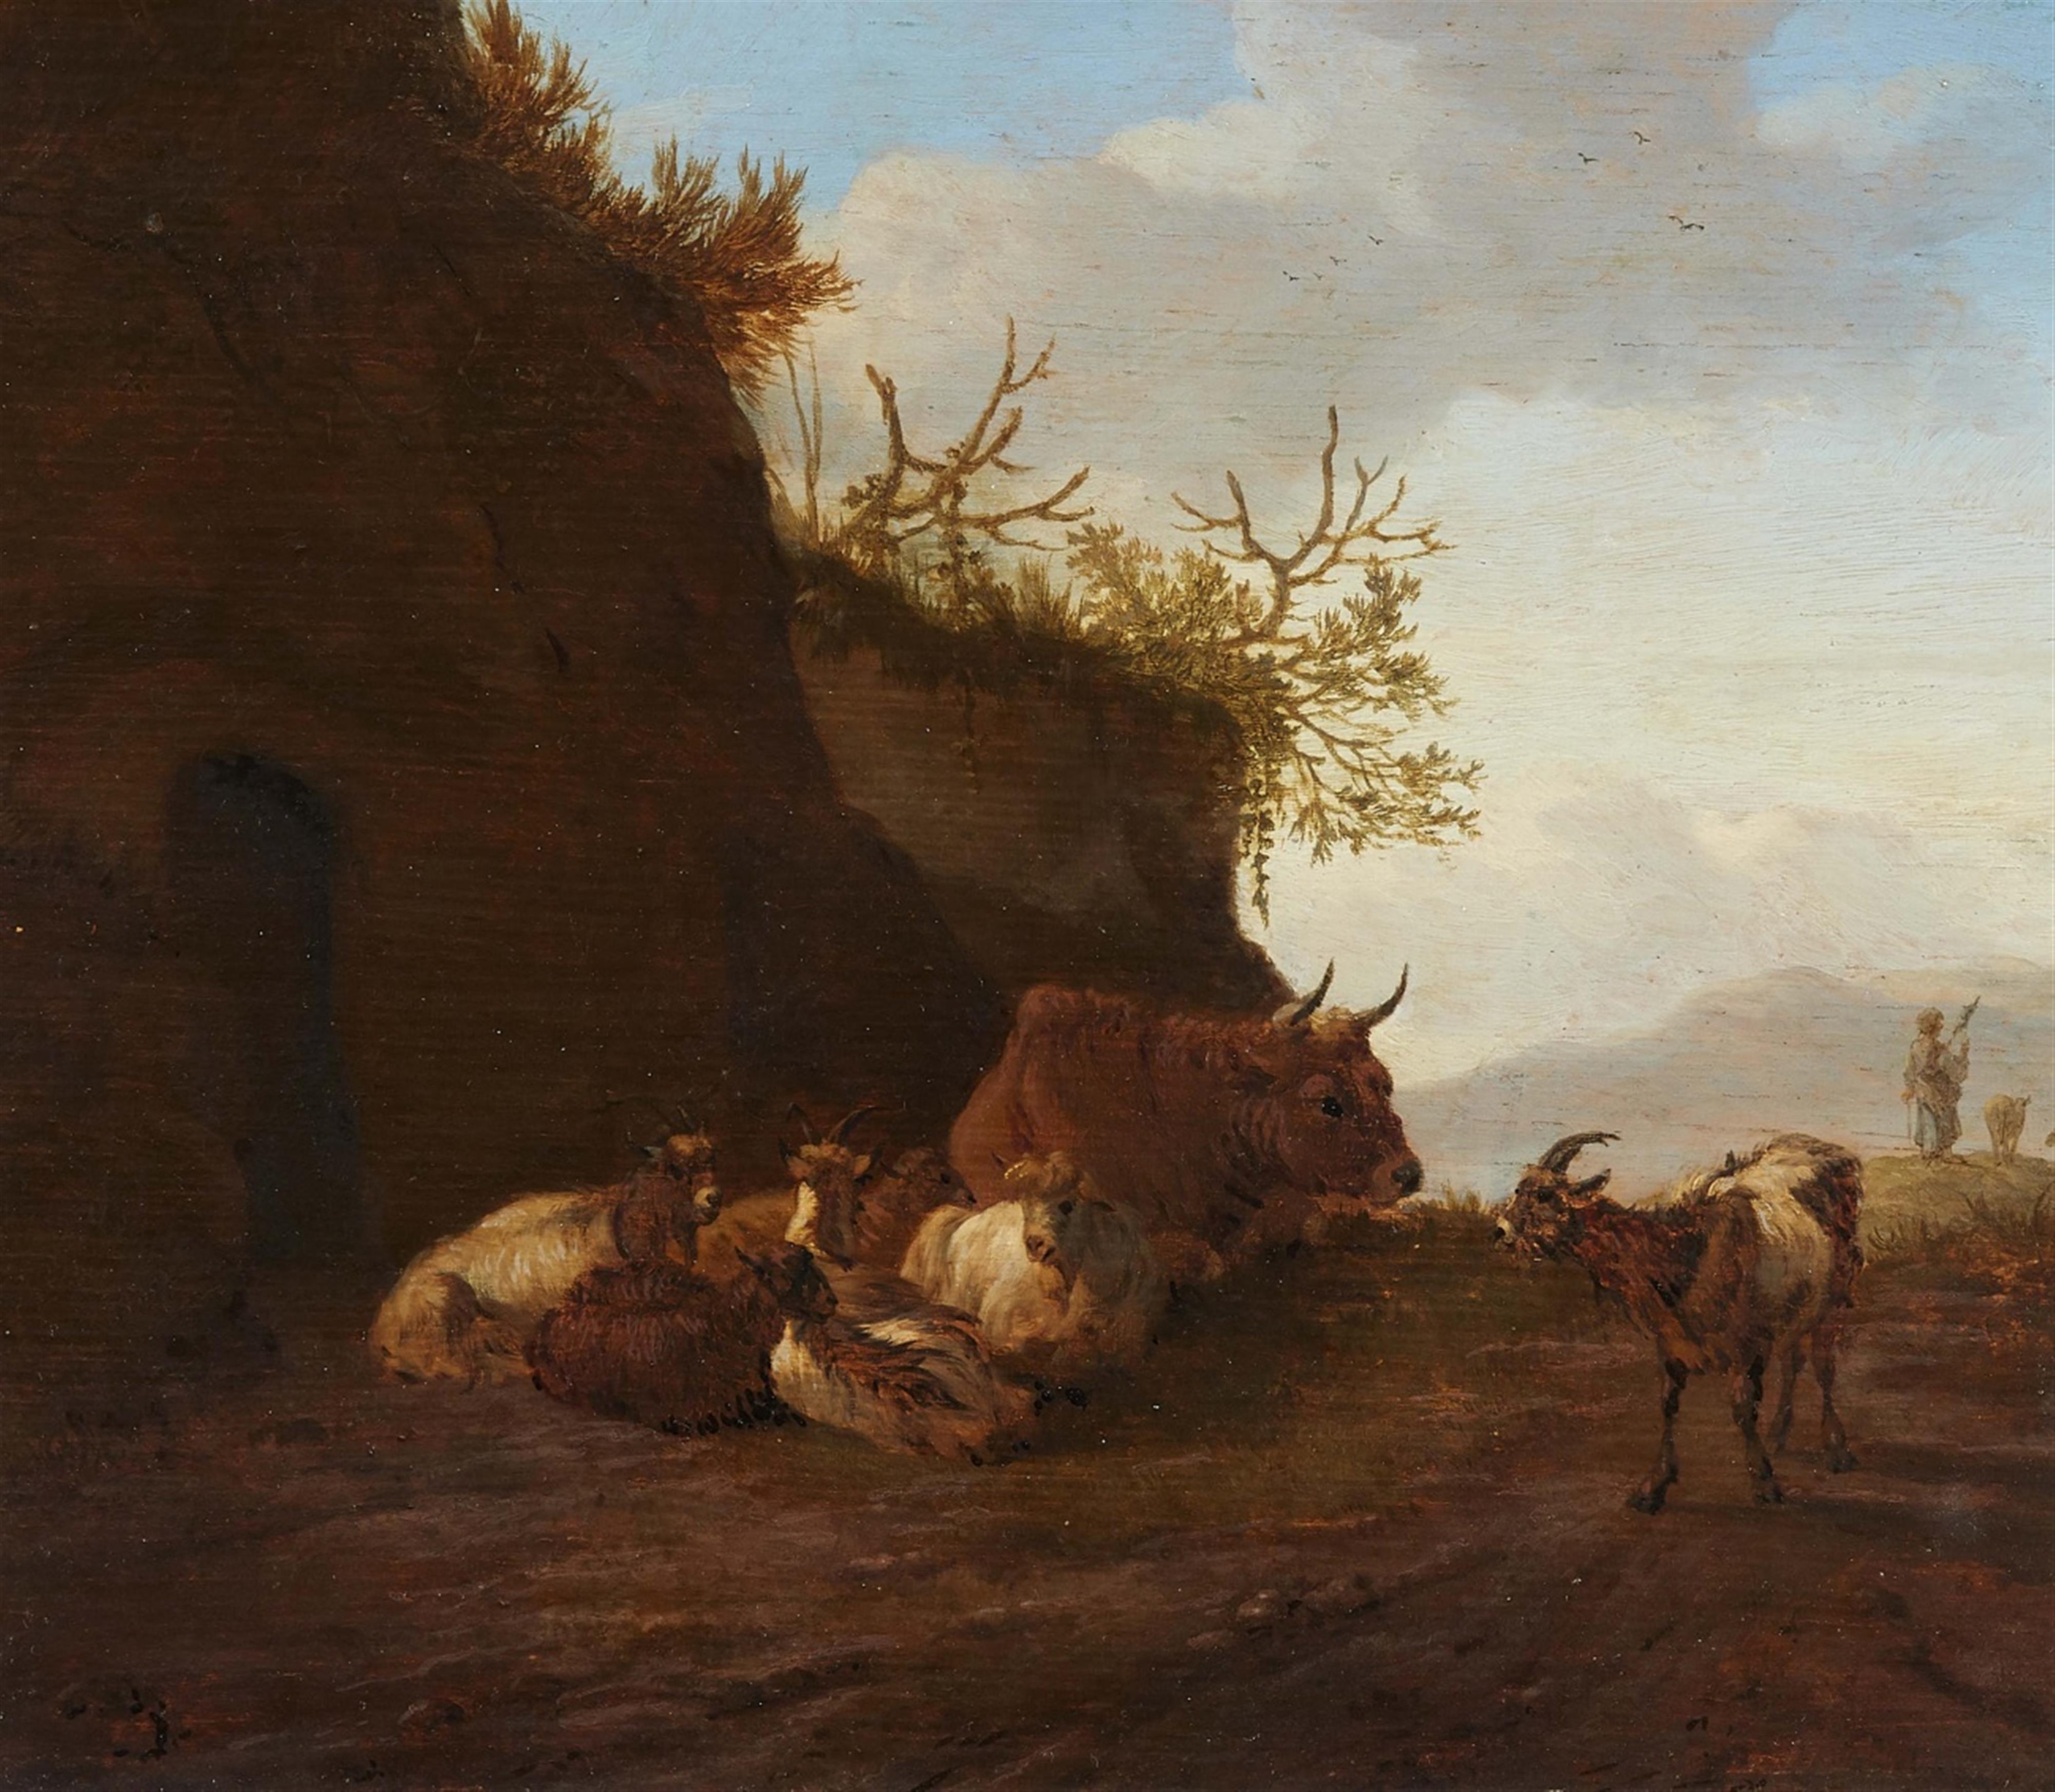 Netherlandish School 17th century - Cattle by a Rock - image-1